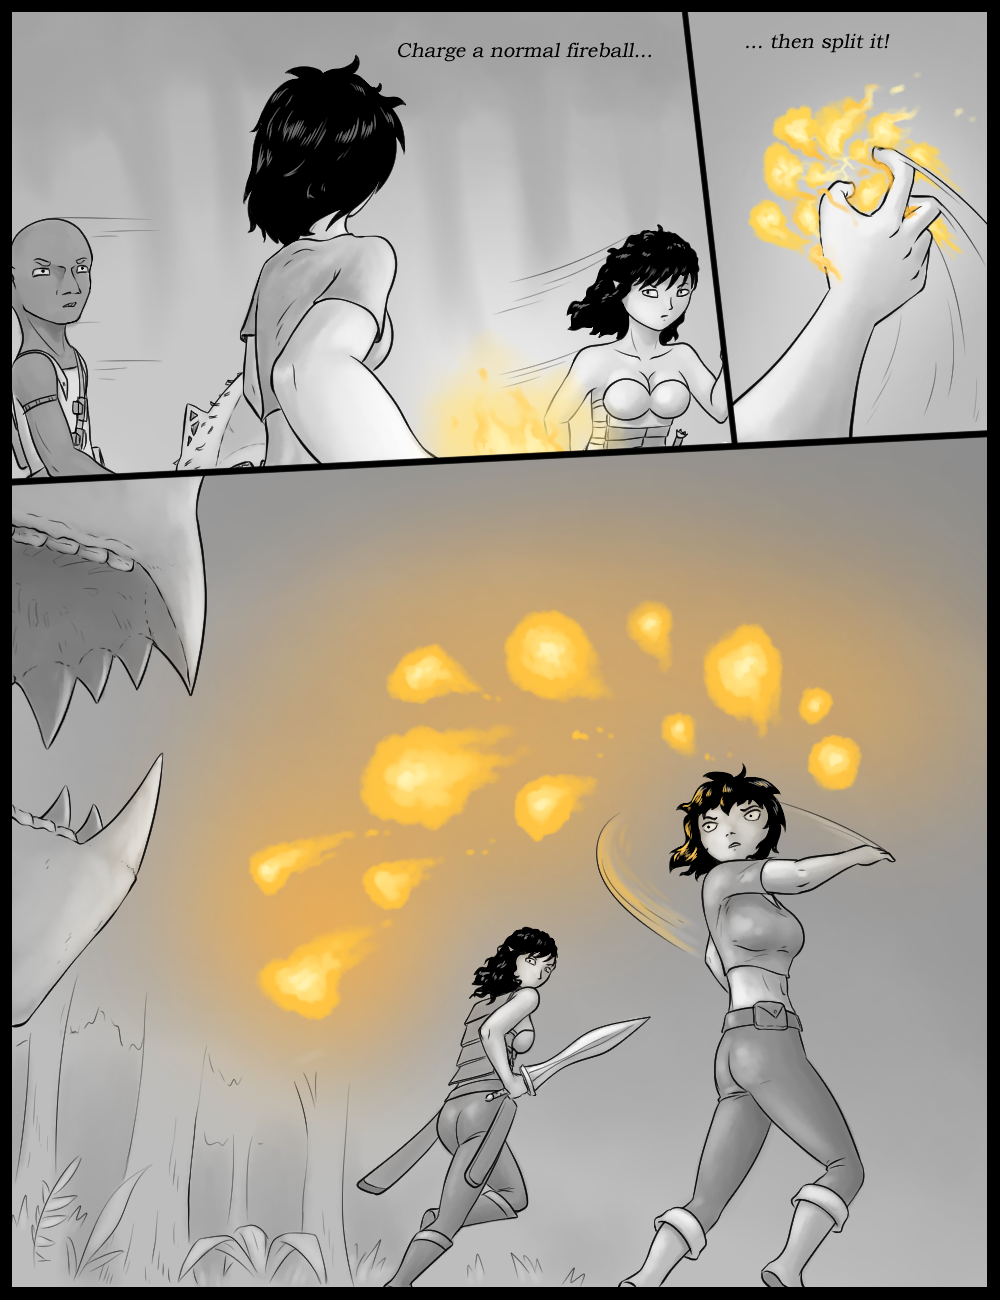 Page 47 - Not the usual spell casting